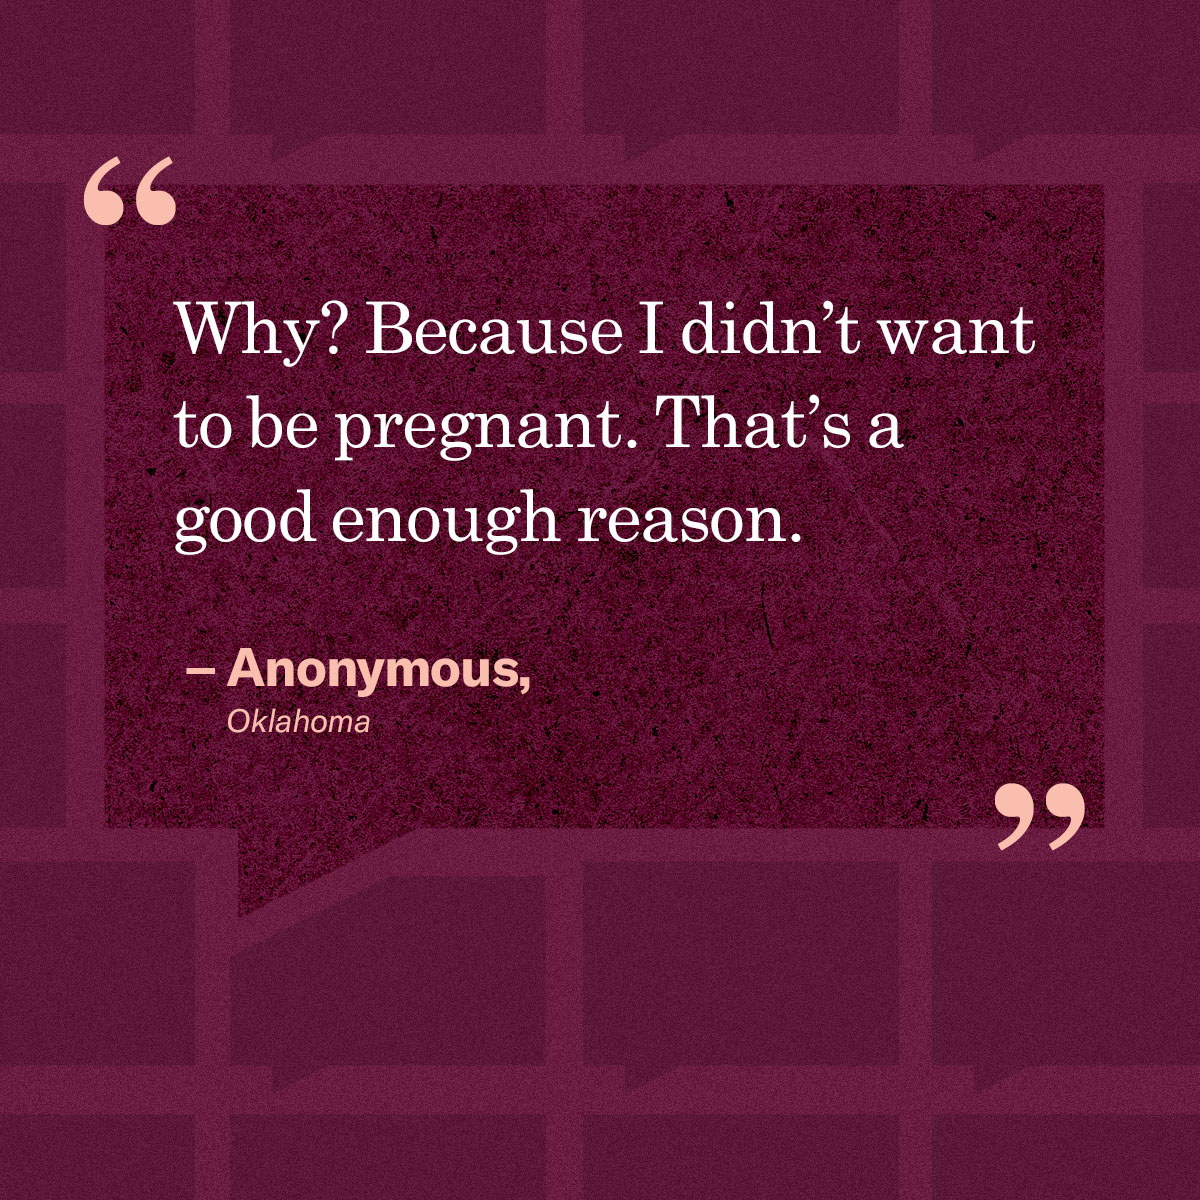 “Why? Because I didn’t want to be pregnant. That’s a good enough reason.” – Anonymous, Oklahoma